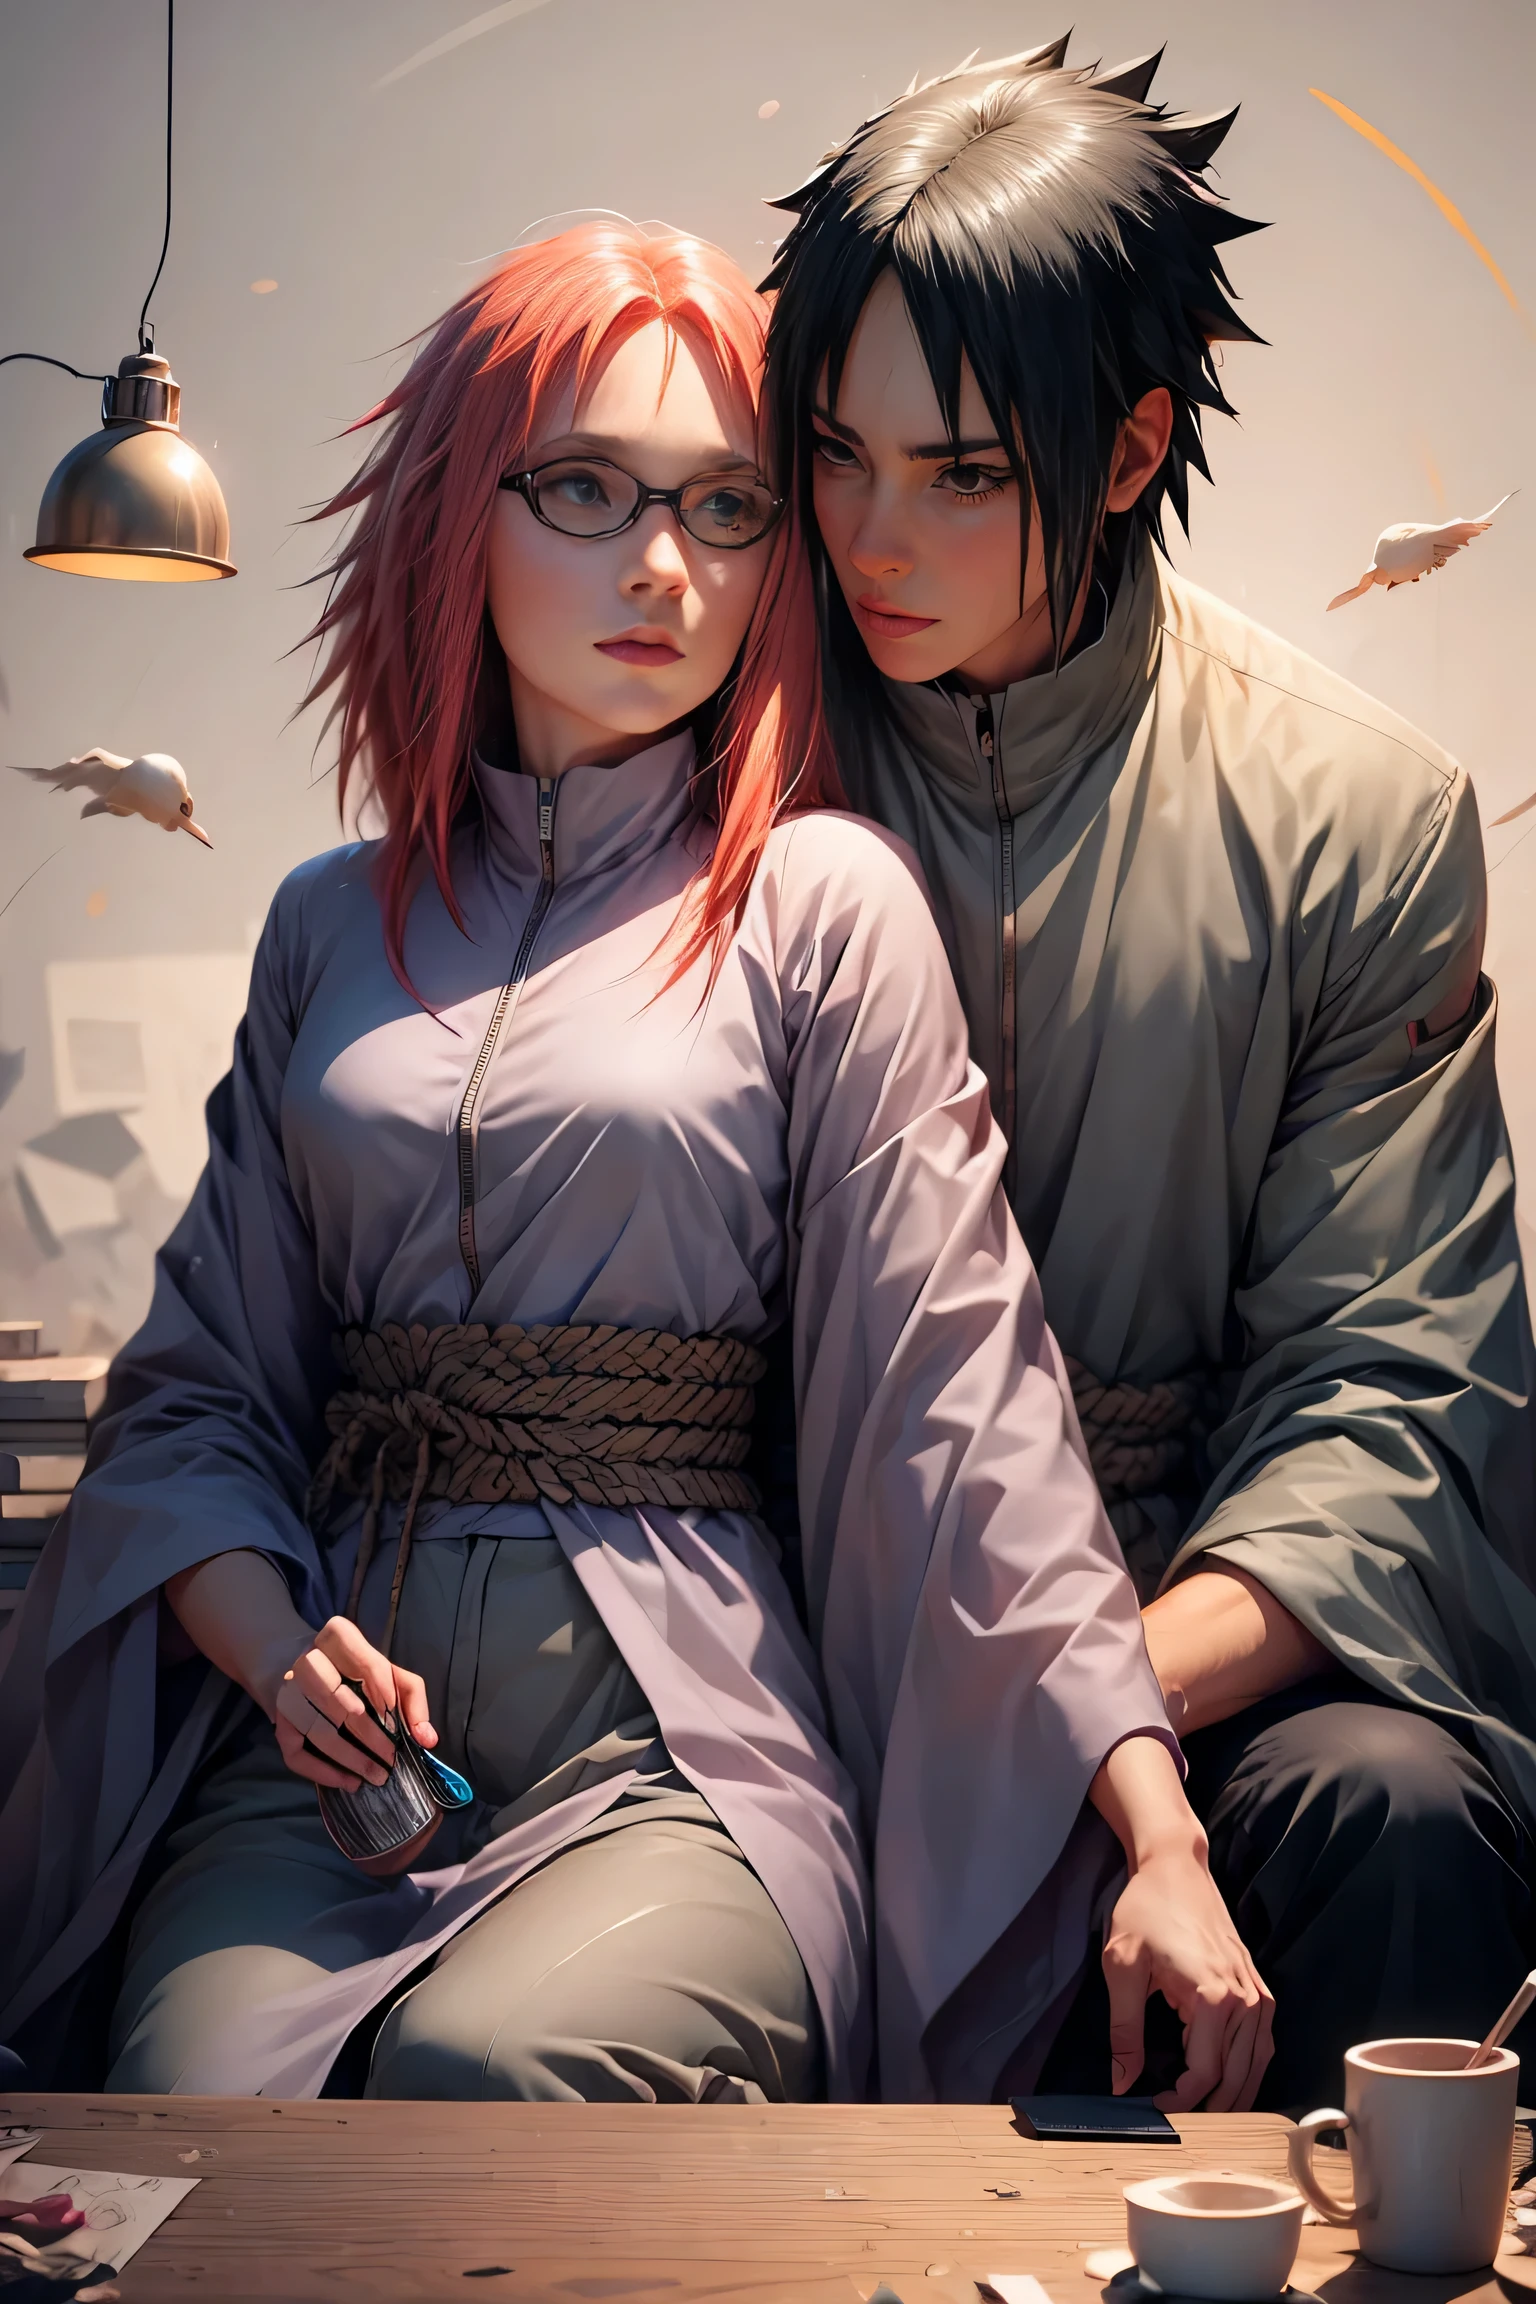 romantic couple ,Anatomy correct，Oriental elements，Style of ink painting, clean, soft lights, ( bokeh)，​masterpiece, super detailed, epic composition, highest quality, 8 THOUSAND，1boy (Sasuke Uchiha with onyx spikes in a dark blue outfit) (kisses) 1girl (Karin Uzumaki with bright red hair, red eye,  Glasses in a purple outfit.)